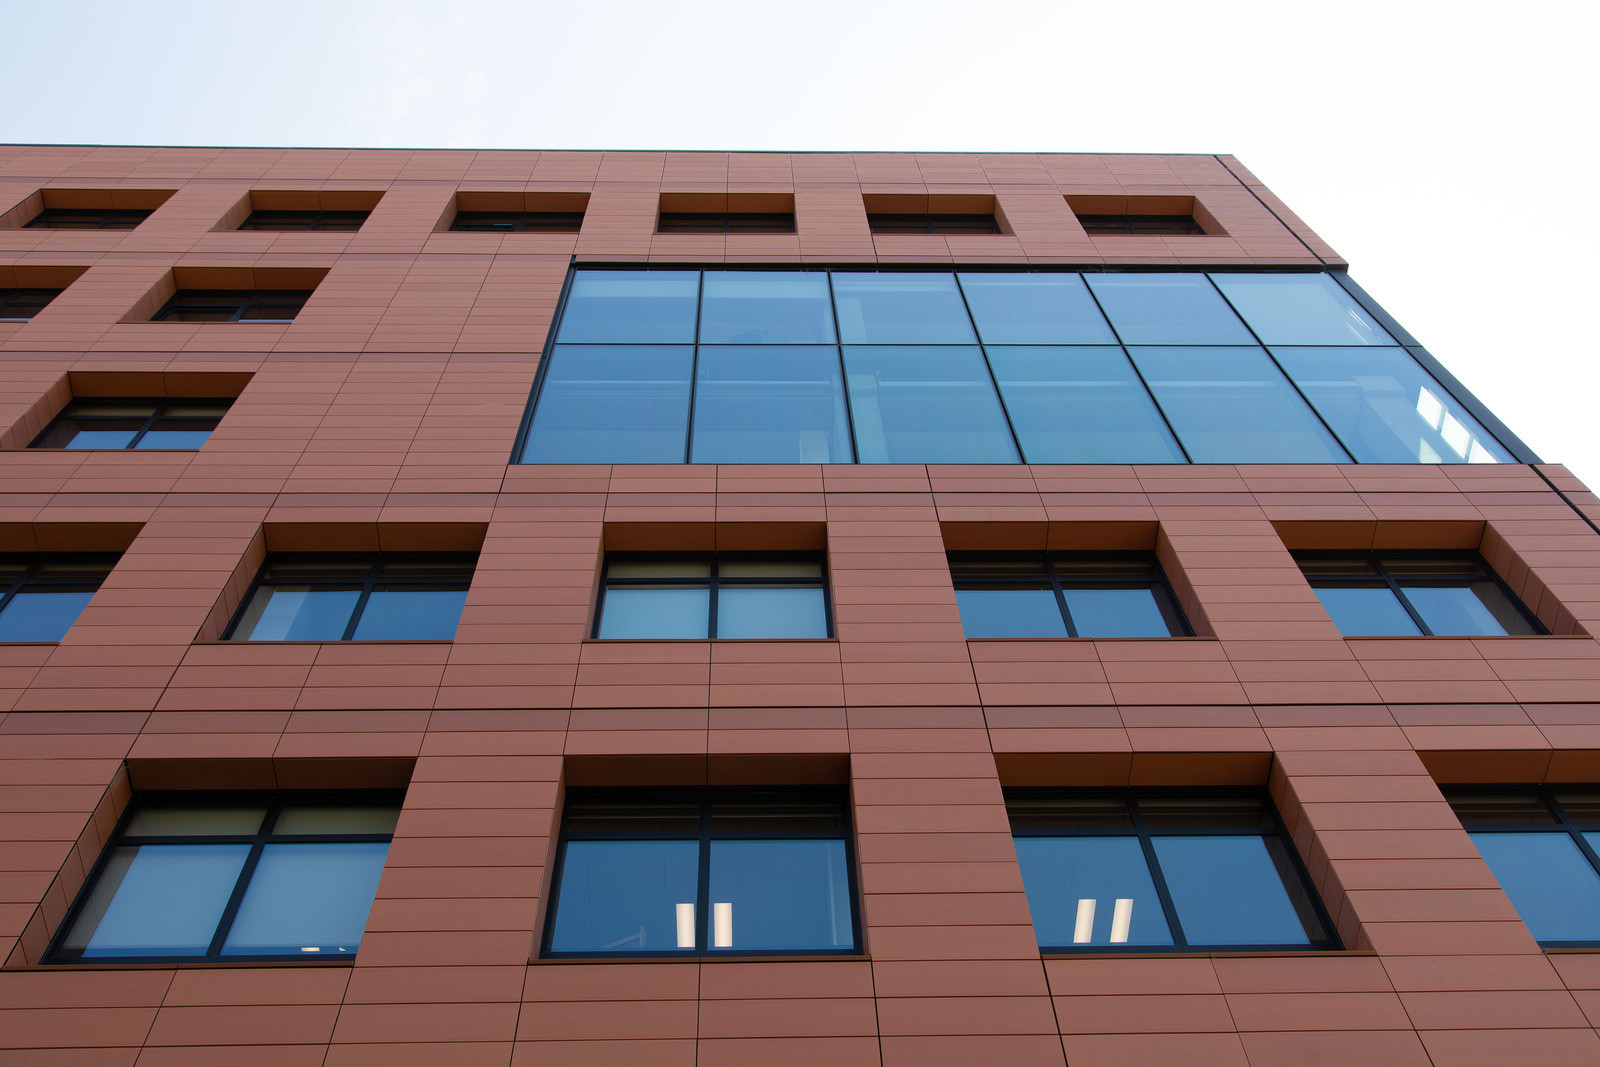 Innovative design of a building with glass windows and terracotta tiles